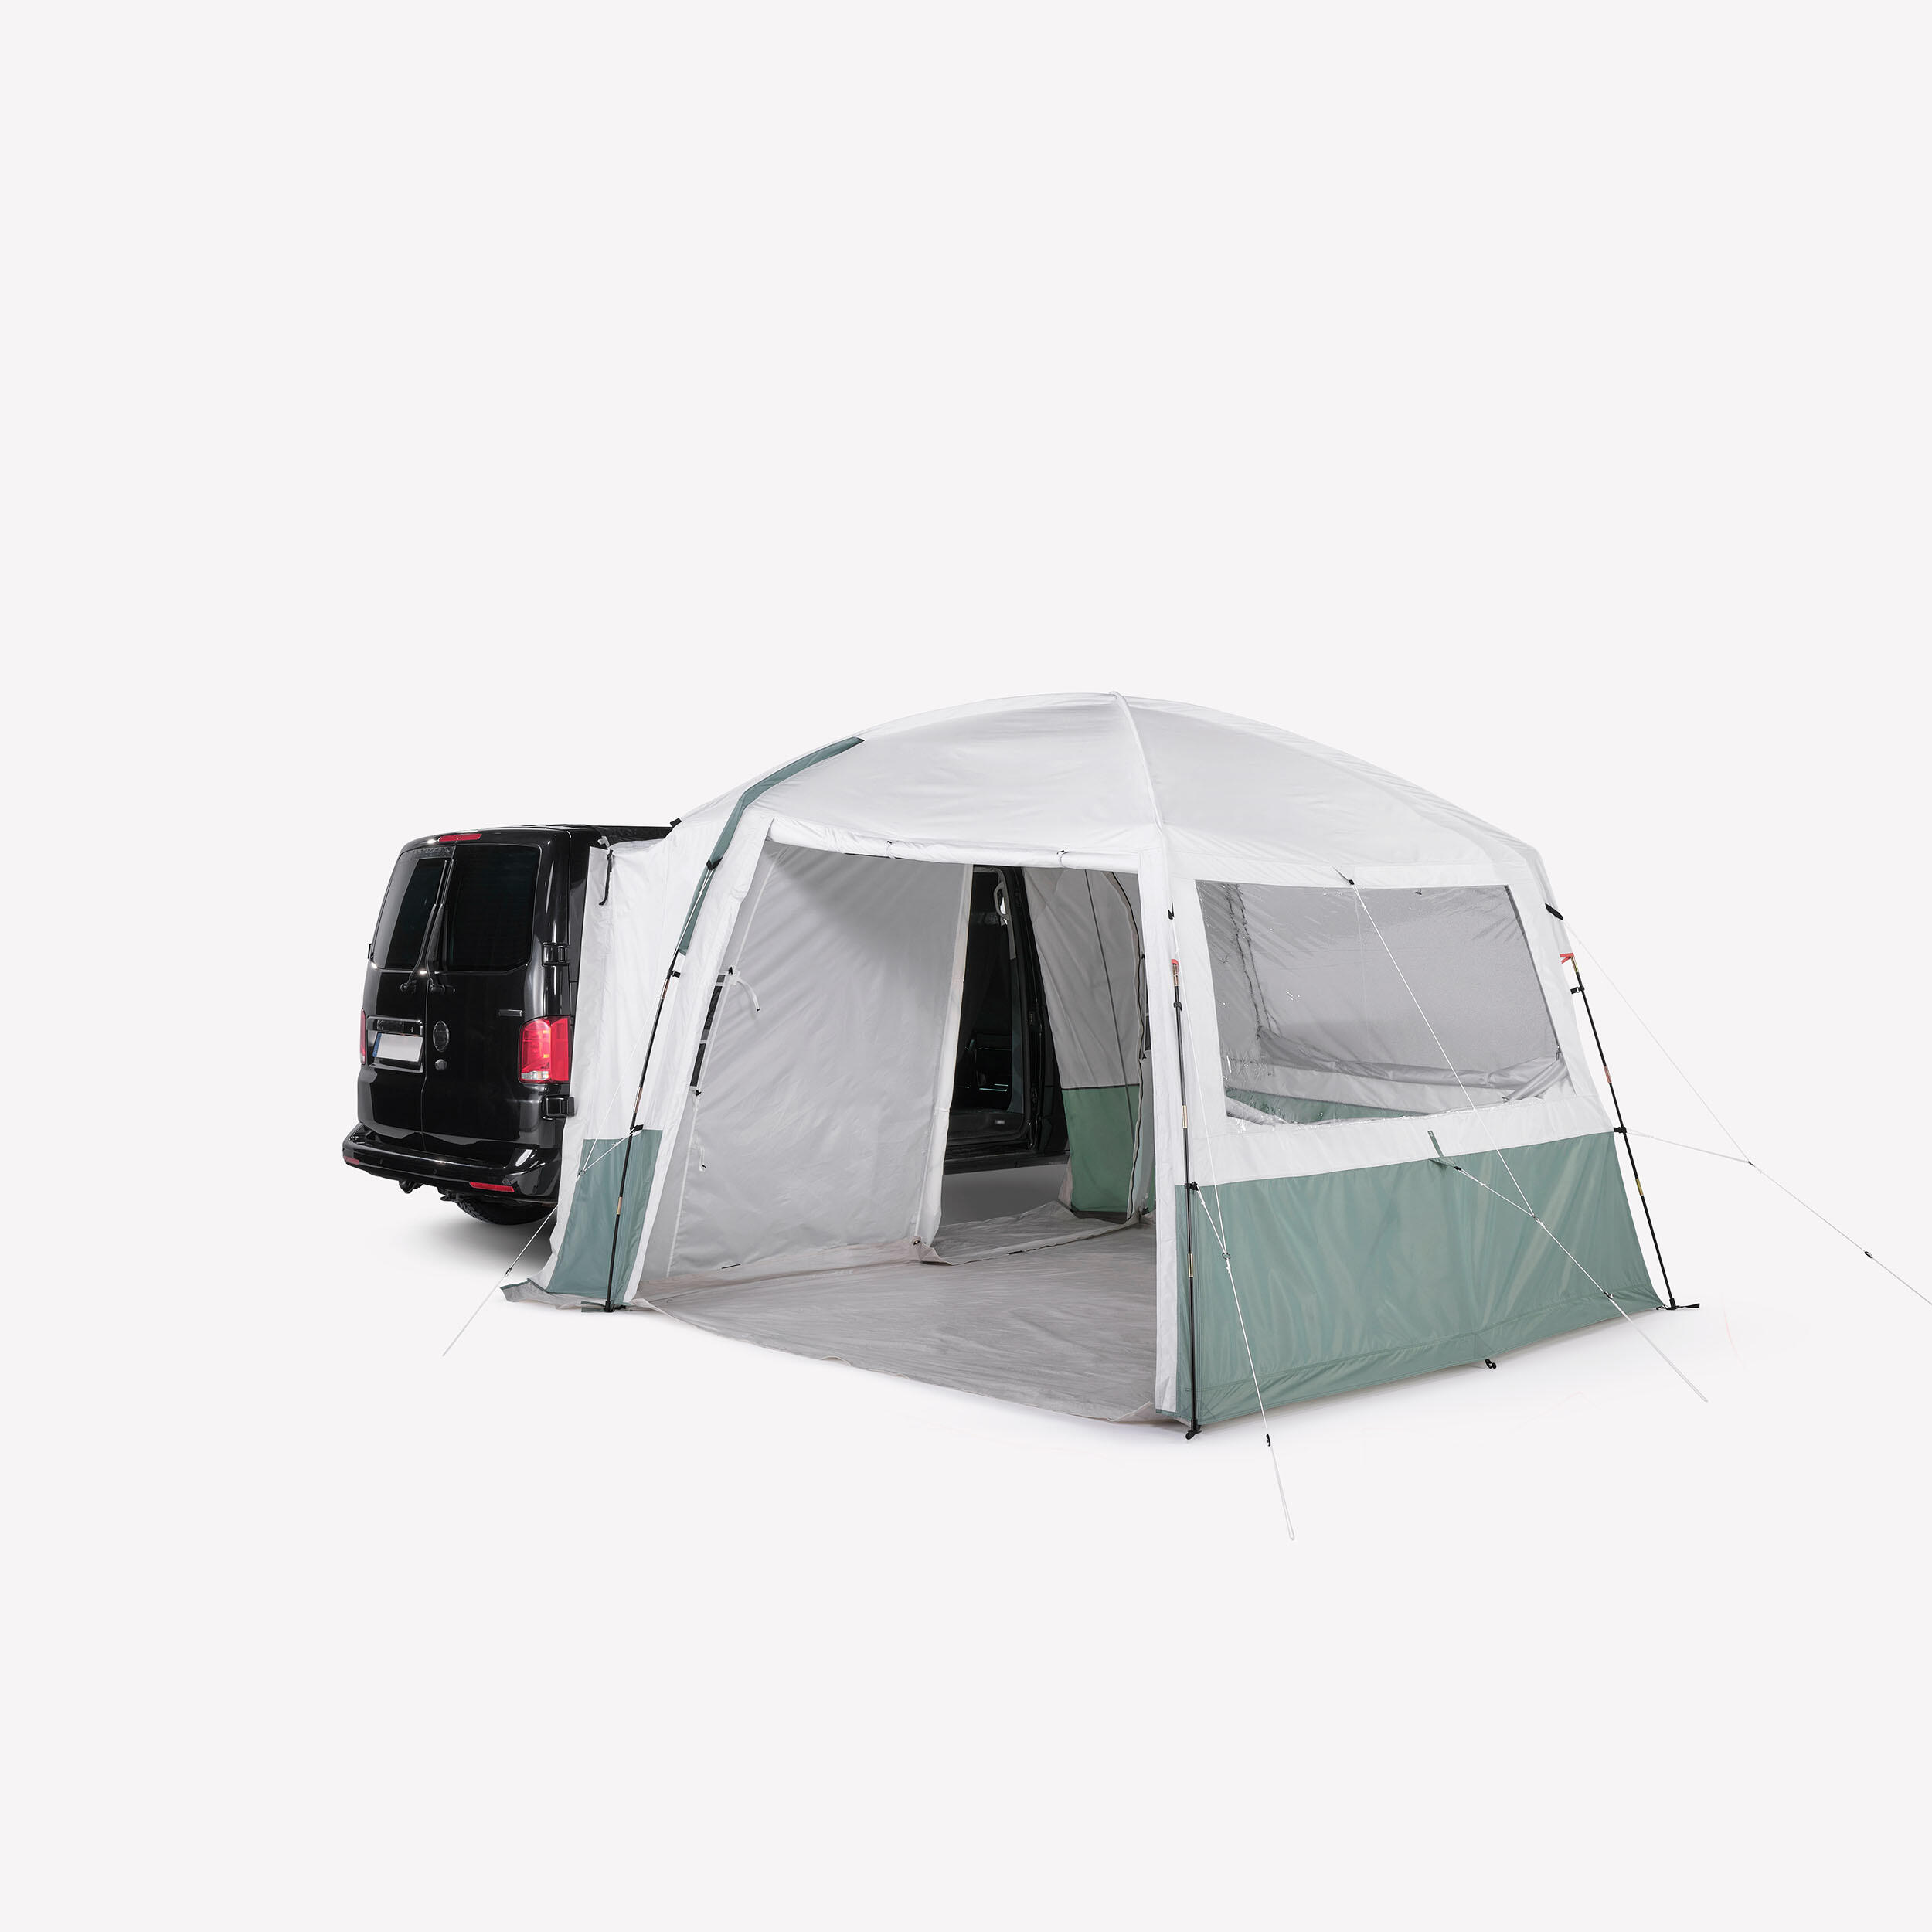 Pole awning for vans and trucks - Van Connect Arpenaz Fresh - 6 people 5/16